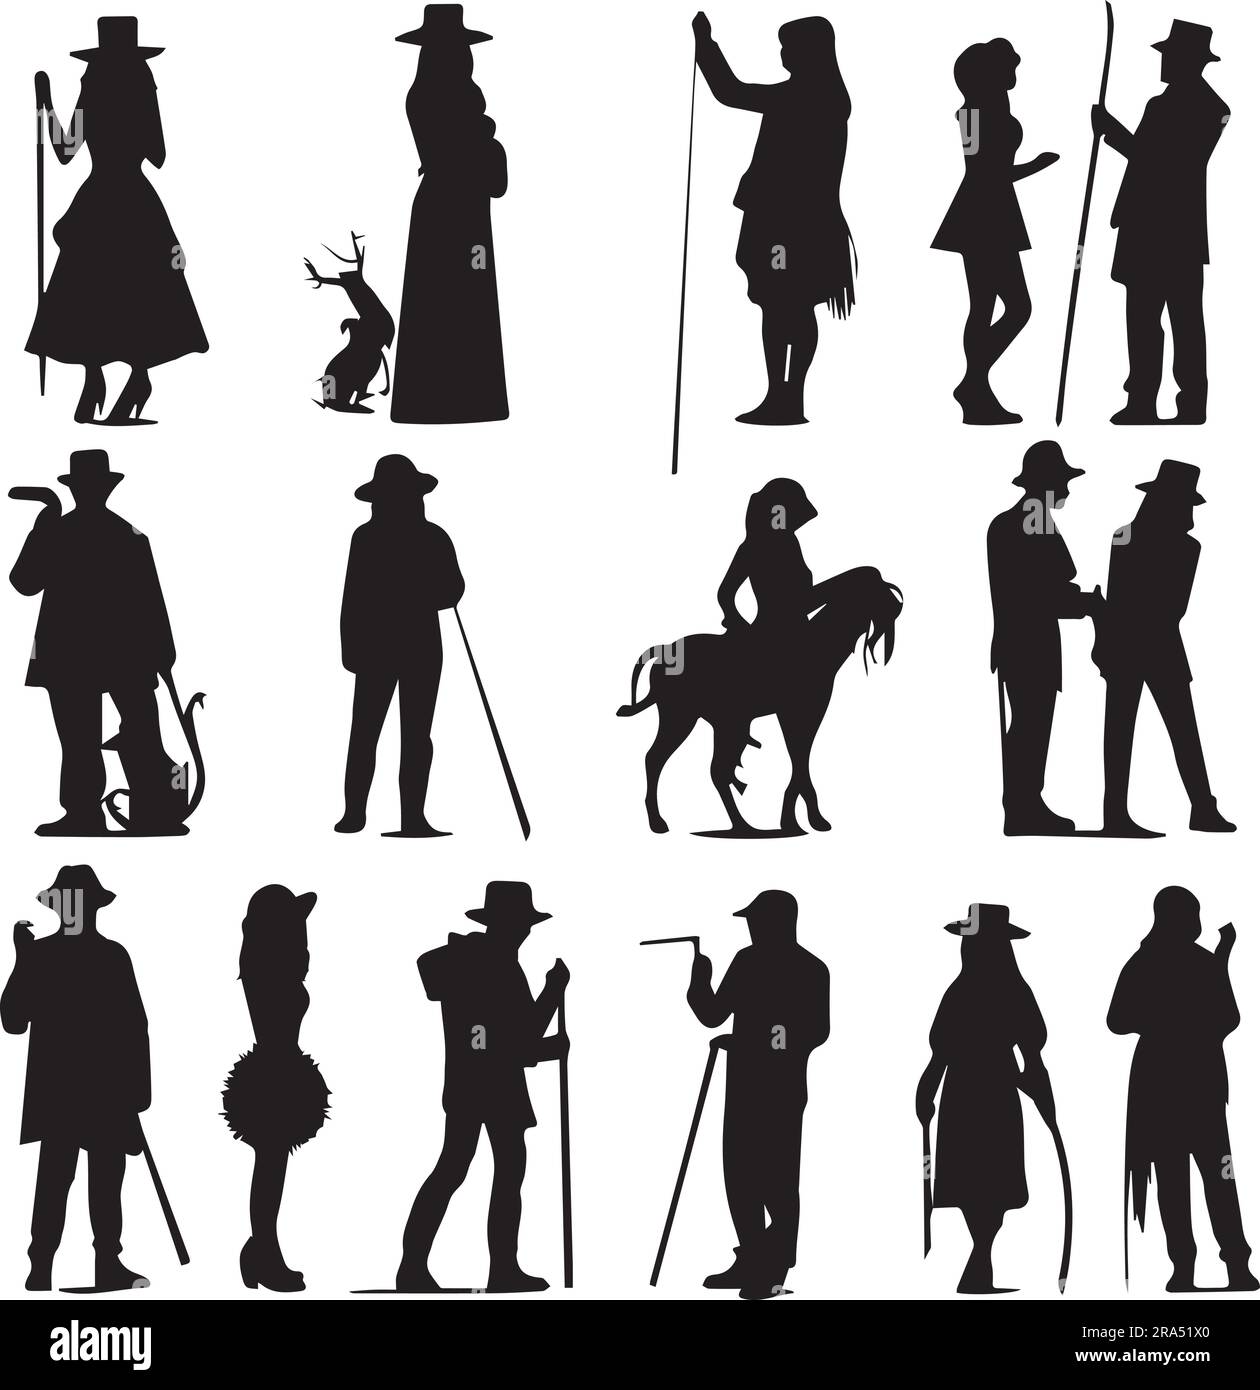 A set of silhouette People vector illustration Stock Vector